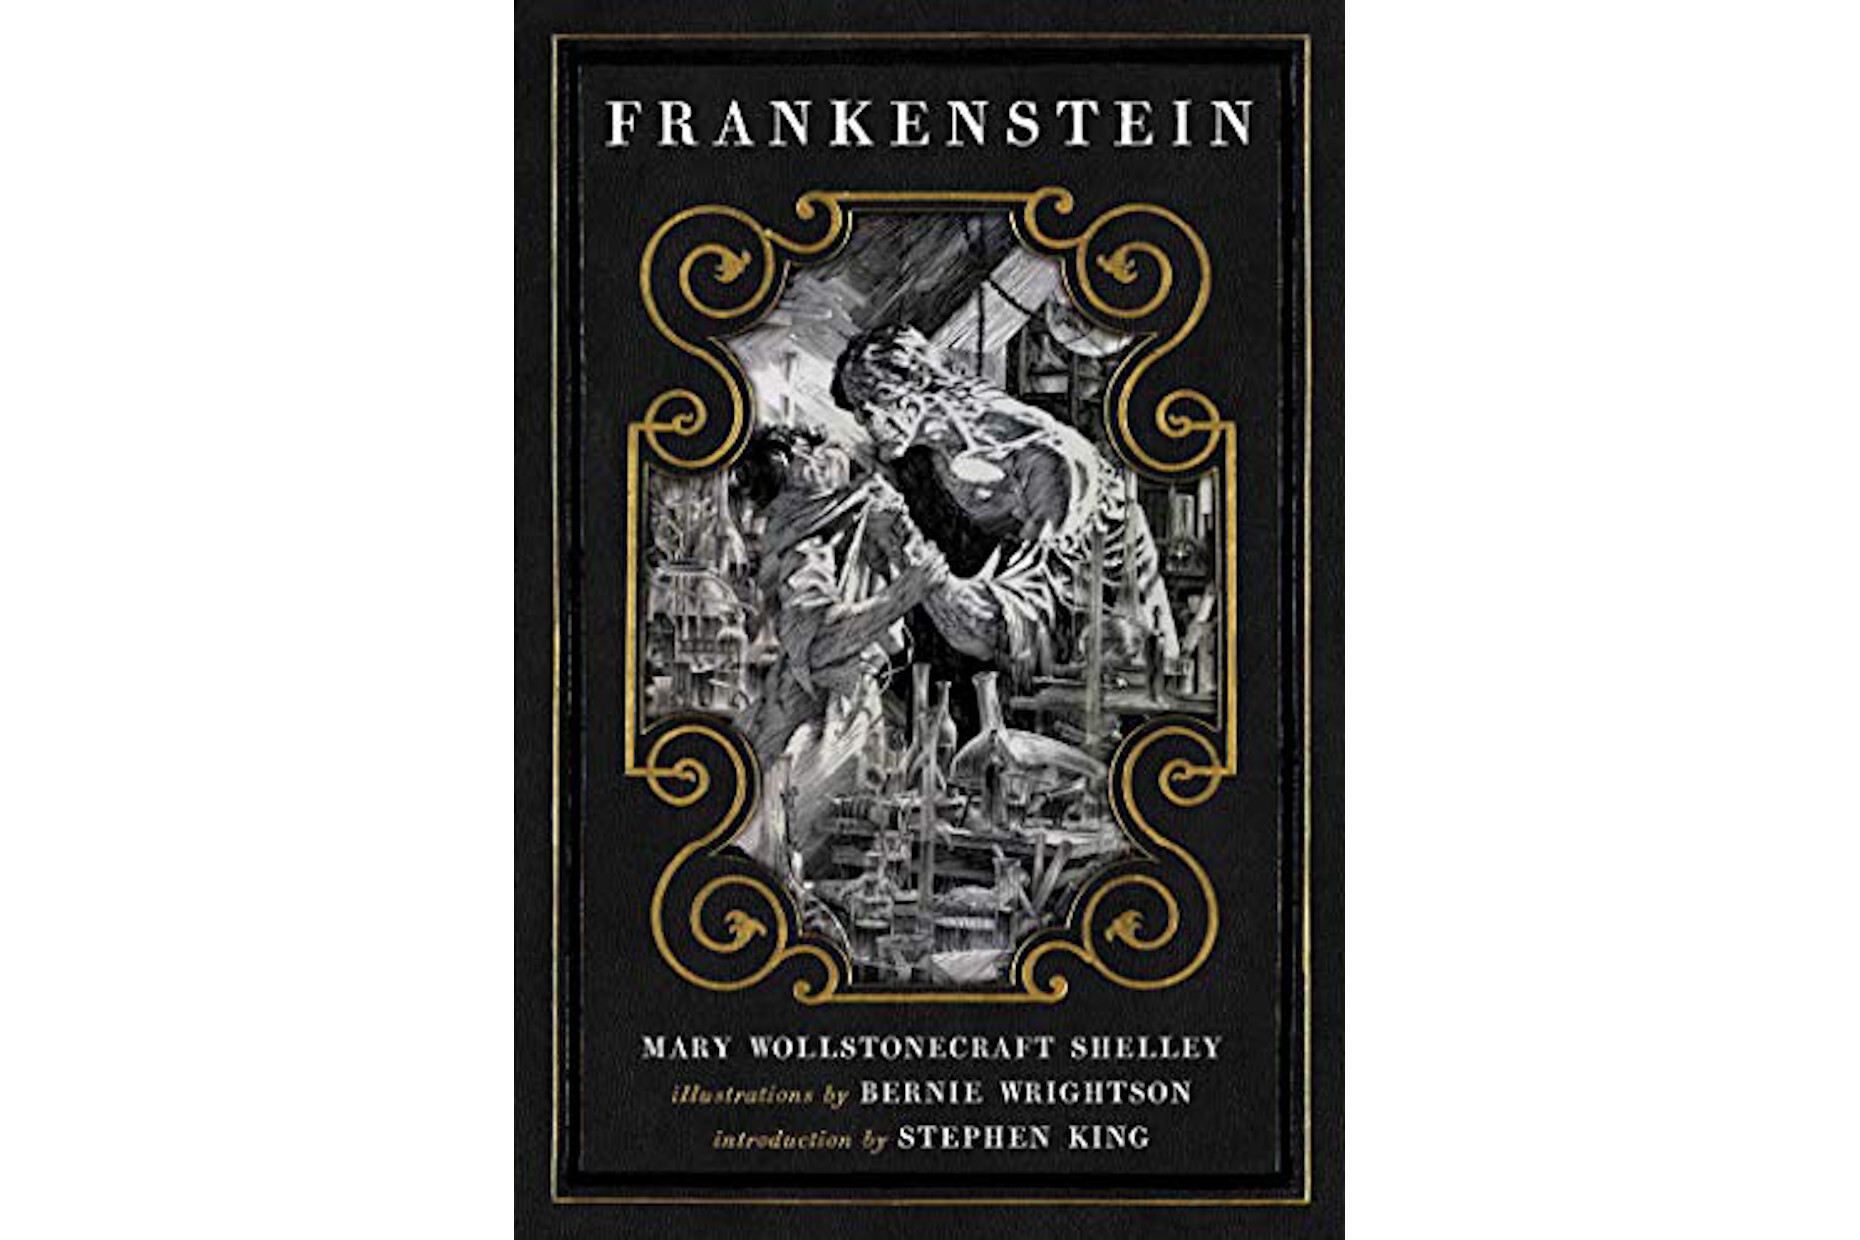 Did you know that Mary Shelley was only 19 when she wrote <a href="https://www.bbc.co.uk/bitesize/guides/z8w7mp3/revision/1" rel="noreferrer noopener">Frankenstein</a>, now considered a great classic of English literature? The novel tells the story of scientist Victor Frankenstein, who creates a hideous creature by sewing together and giving life to body parts from various corpses. Rejected by Victor and humanity in general, the monster is profoundly lonely and seeks revenge. Mary Shelley first wrote <em>Frankenstein</em> as a short story when the poet Lord Byron suggested that each of his friends write a thrilling tale as an entertaining challenge.First published: 1818